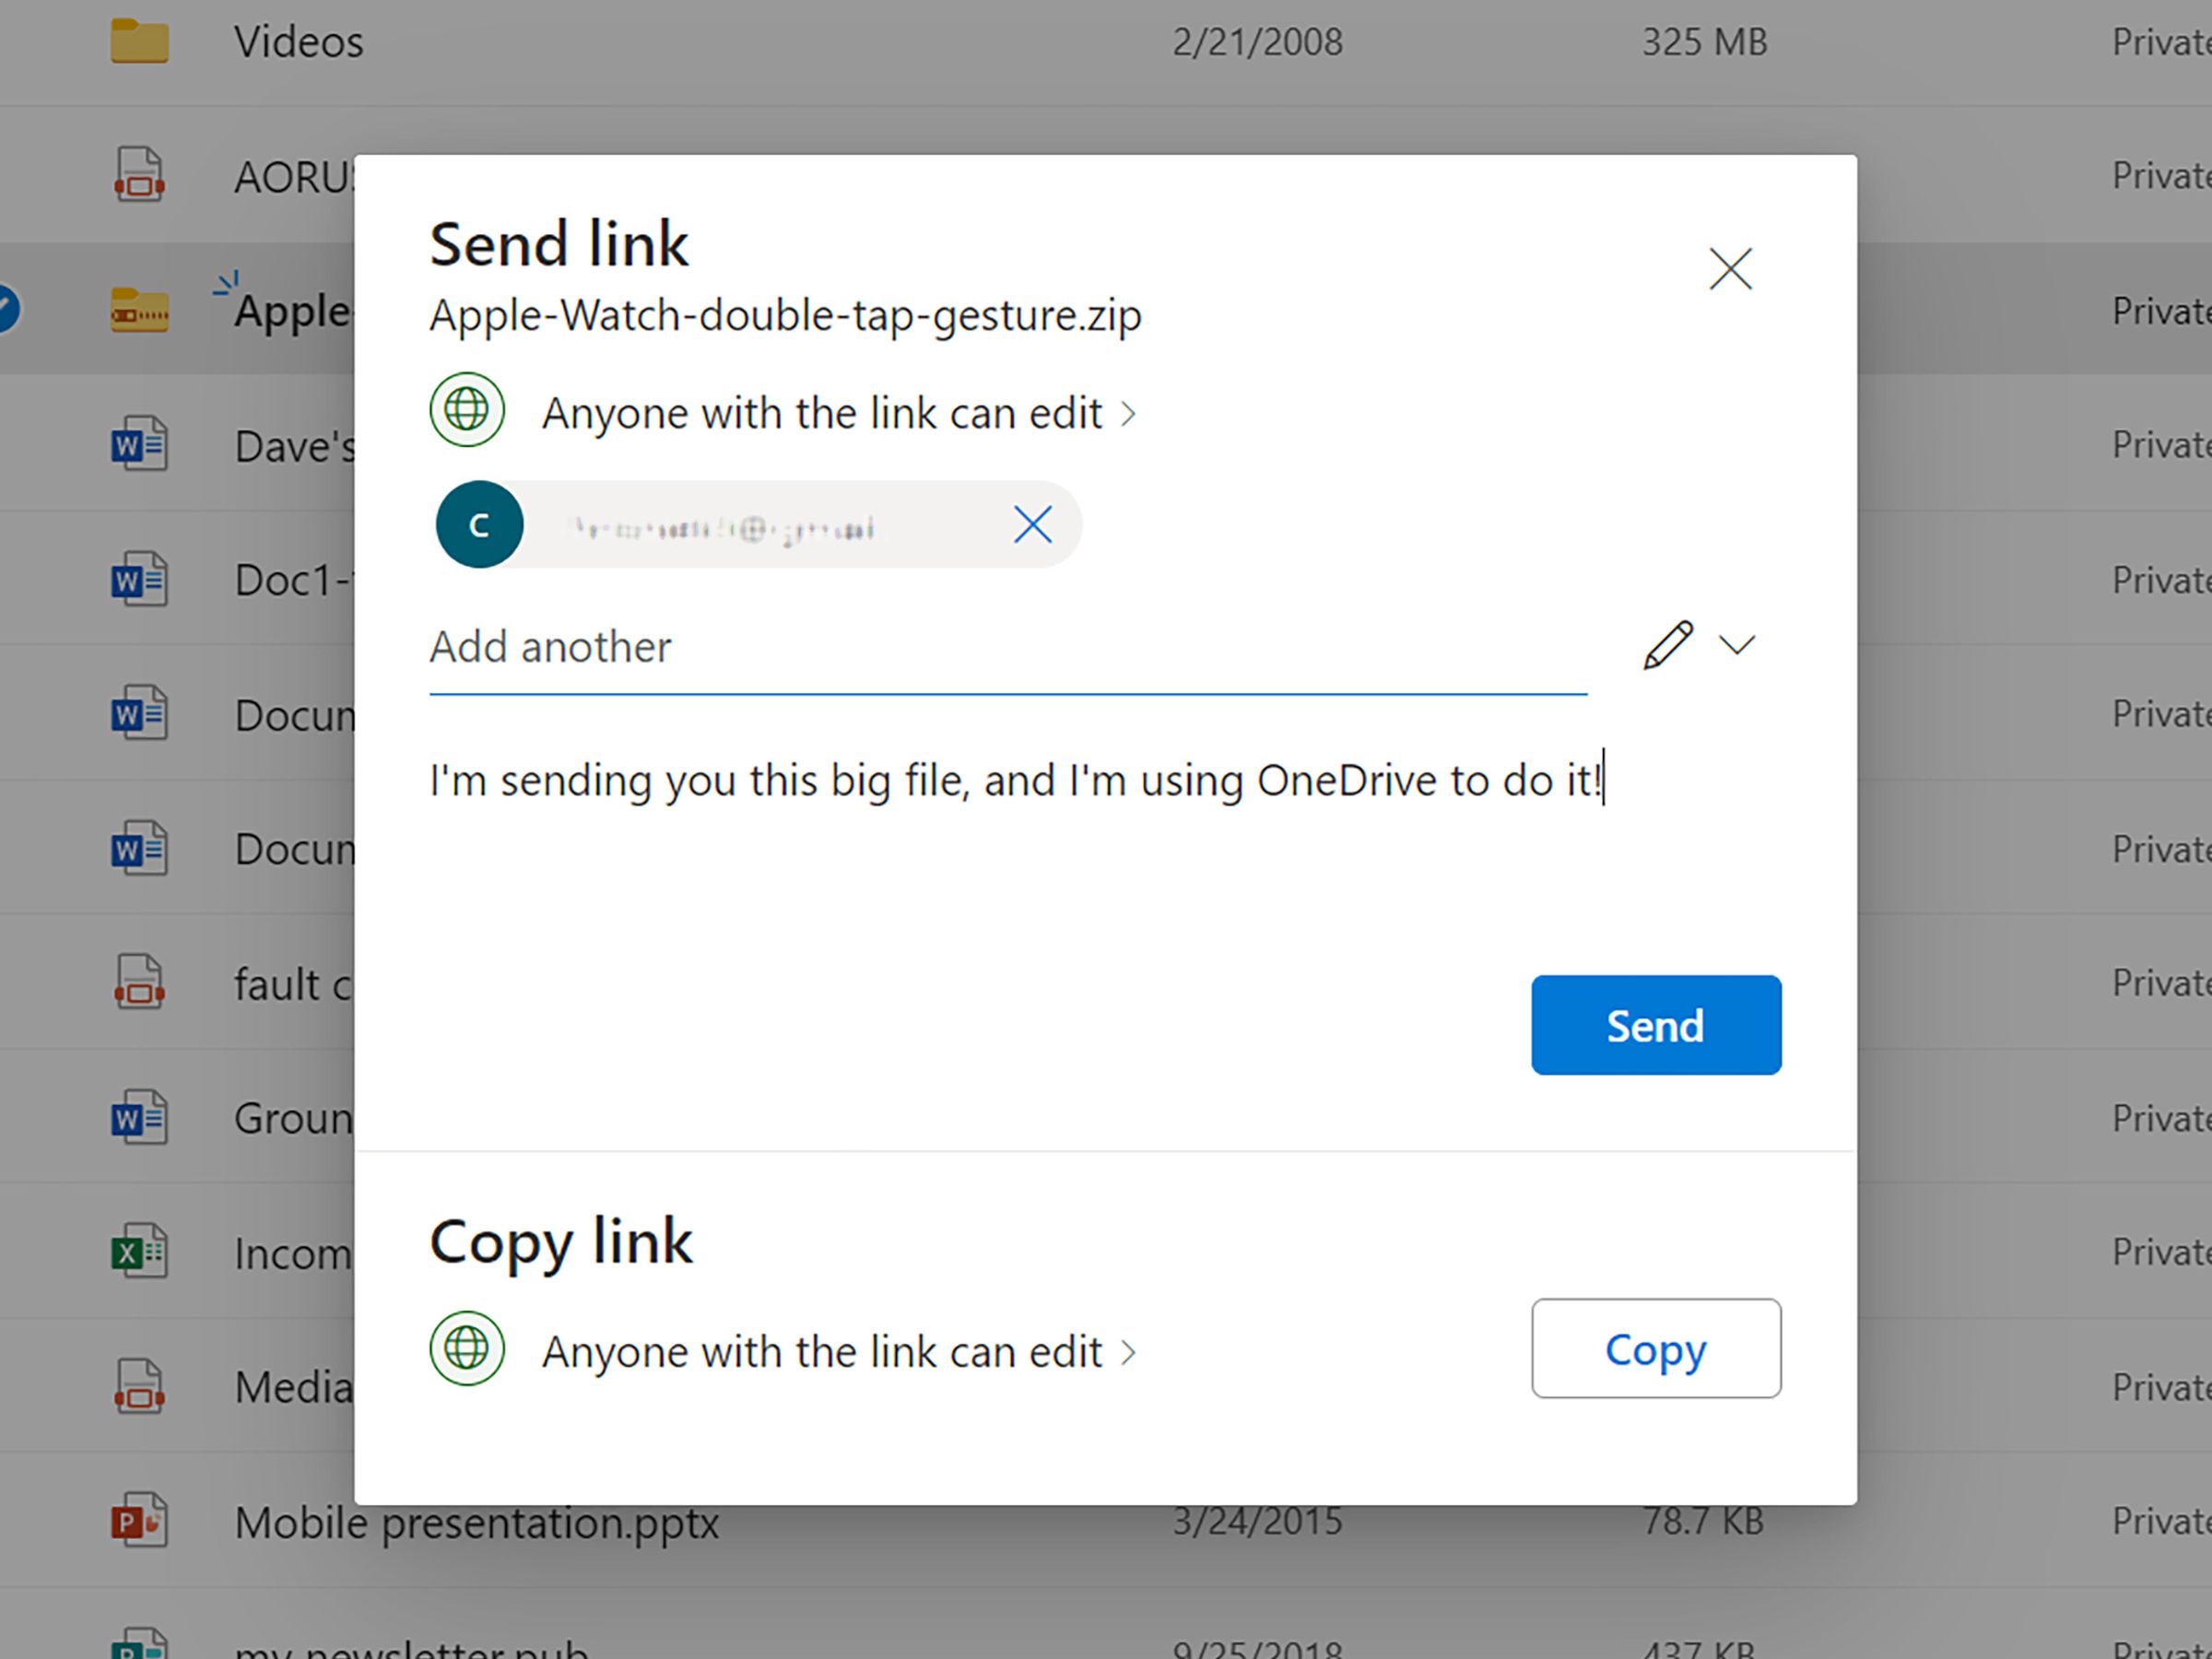 Pop-up with Send Link on top, a file name below that, a note that Anyone with the lijnk can edit, and a place for a message, with a blue Send button and a Copy Link section.